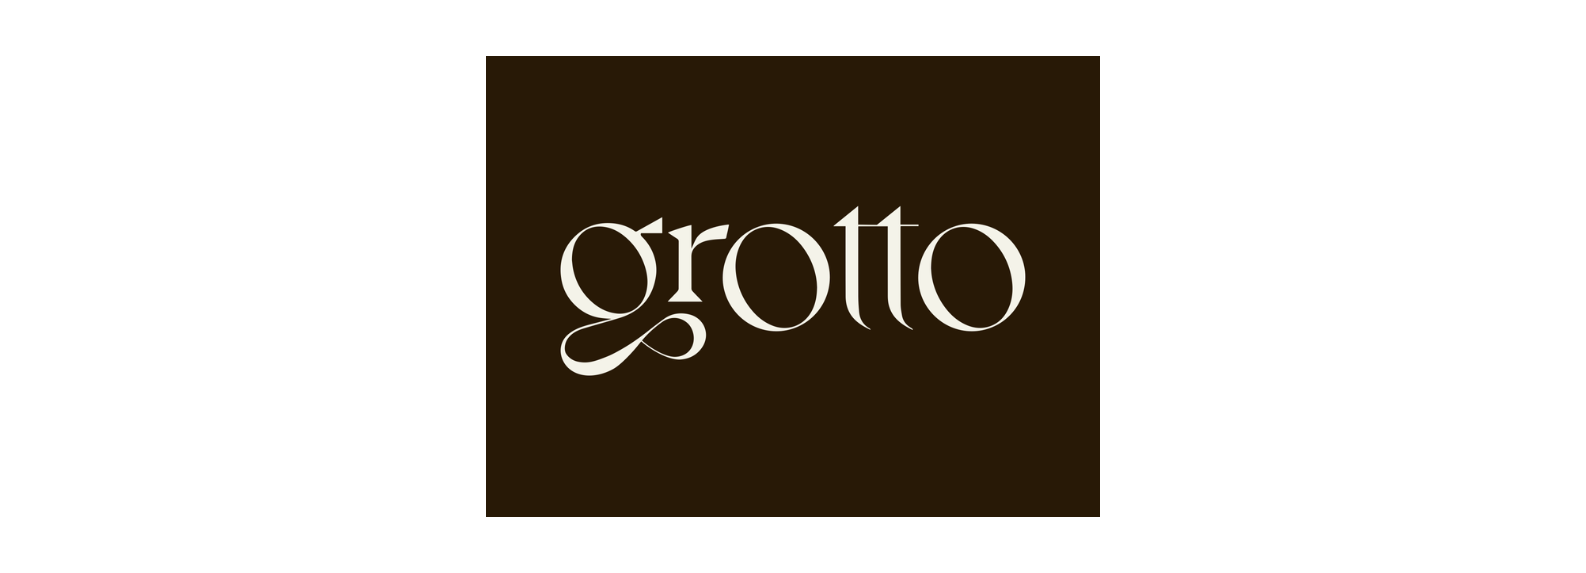 Delicious Cocktail and Welcoming Atmosphere - grotto